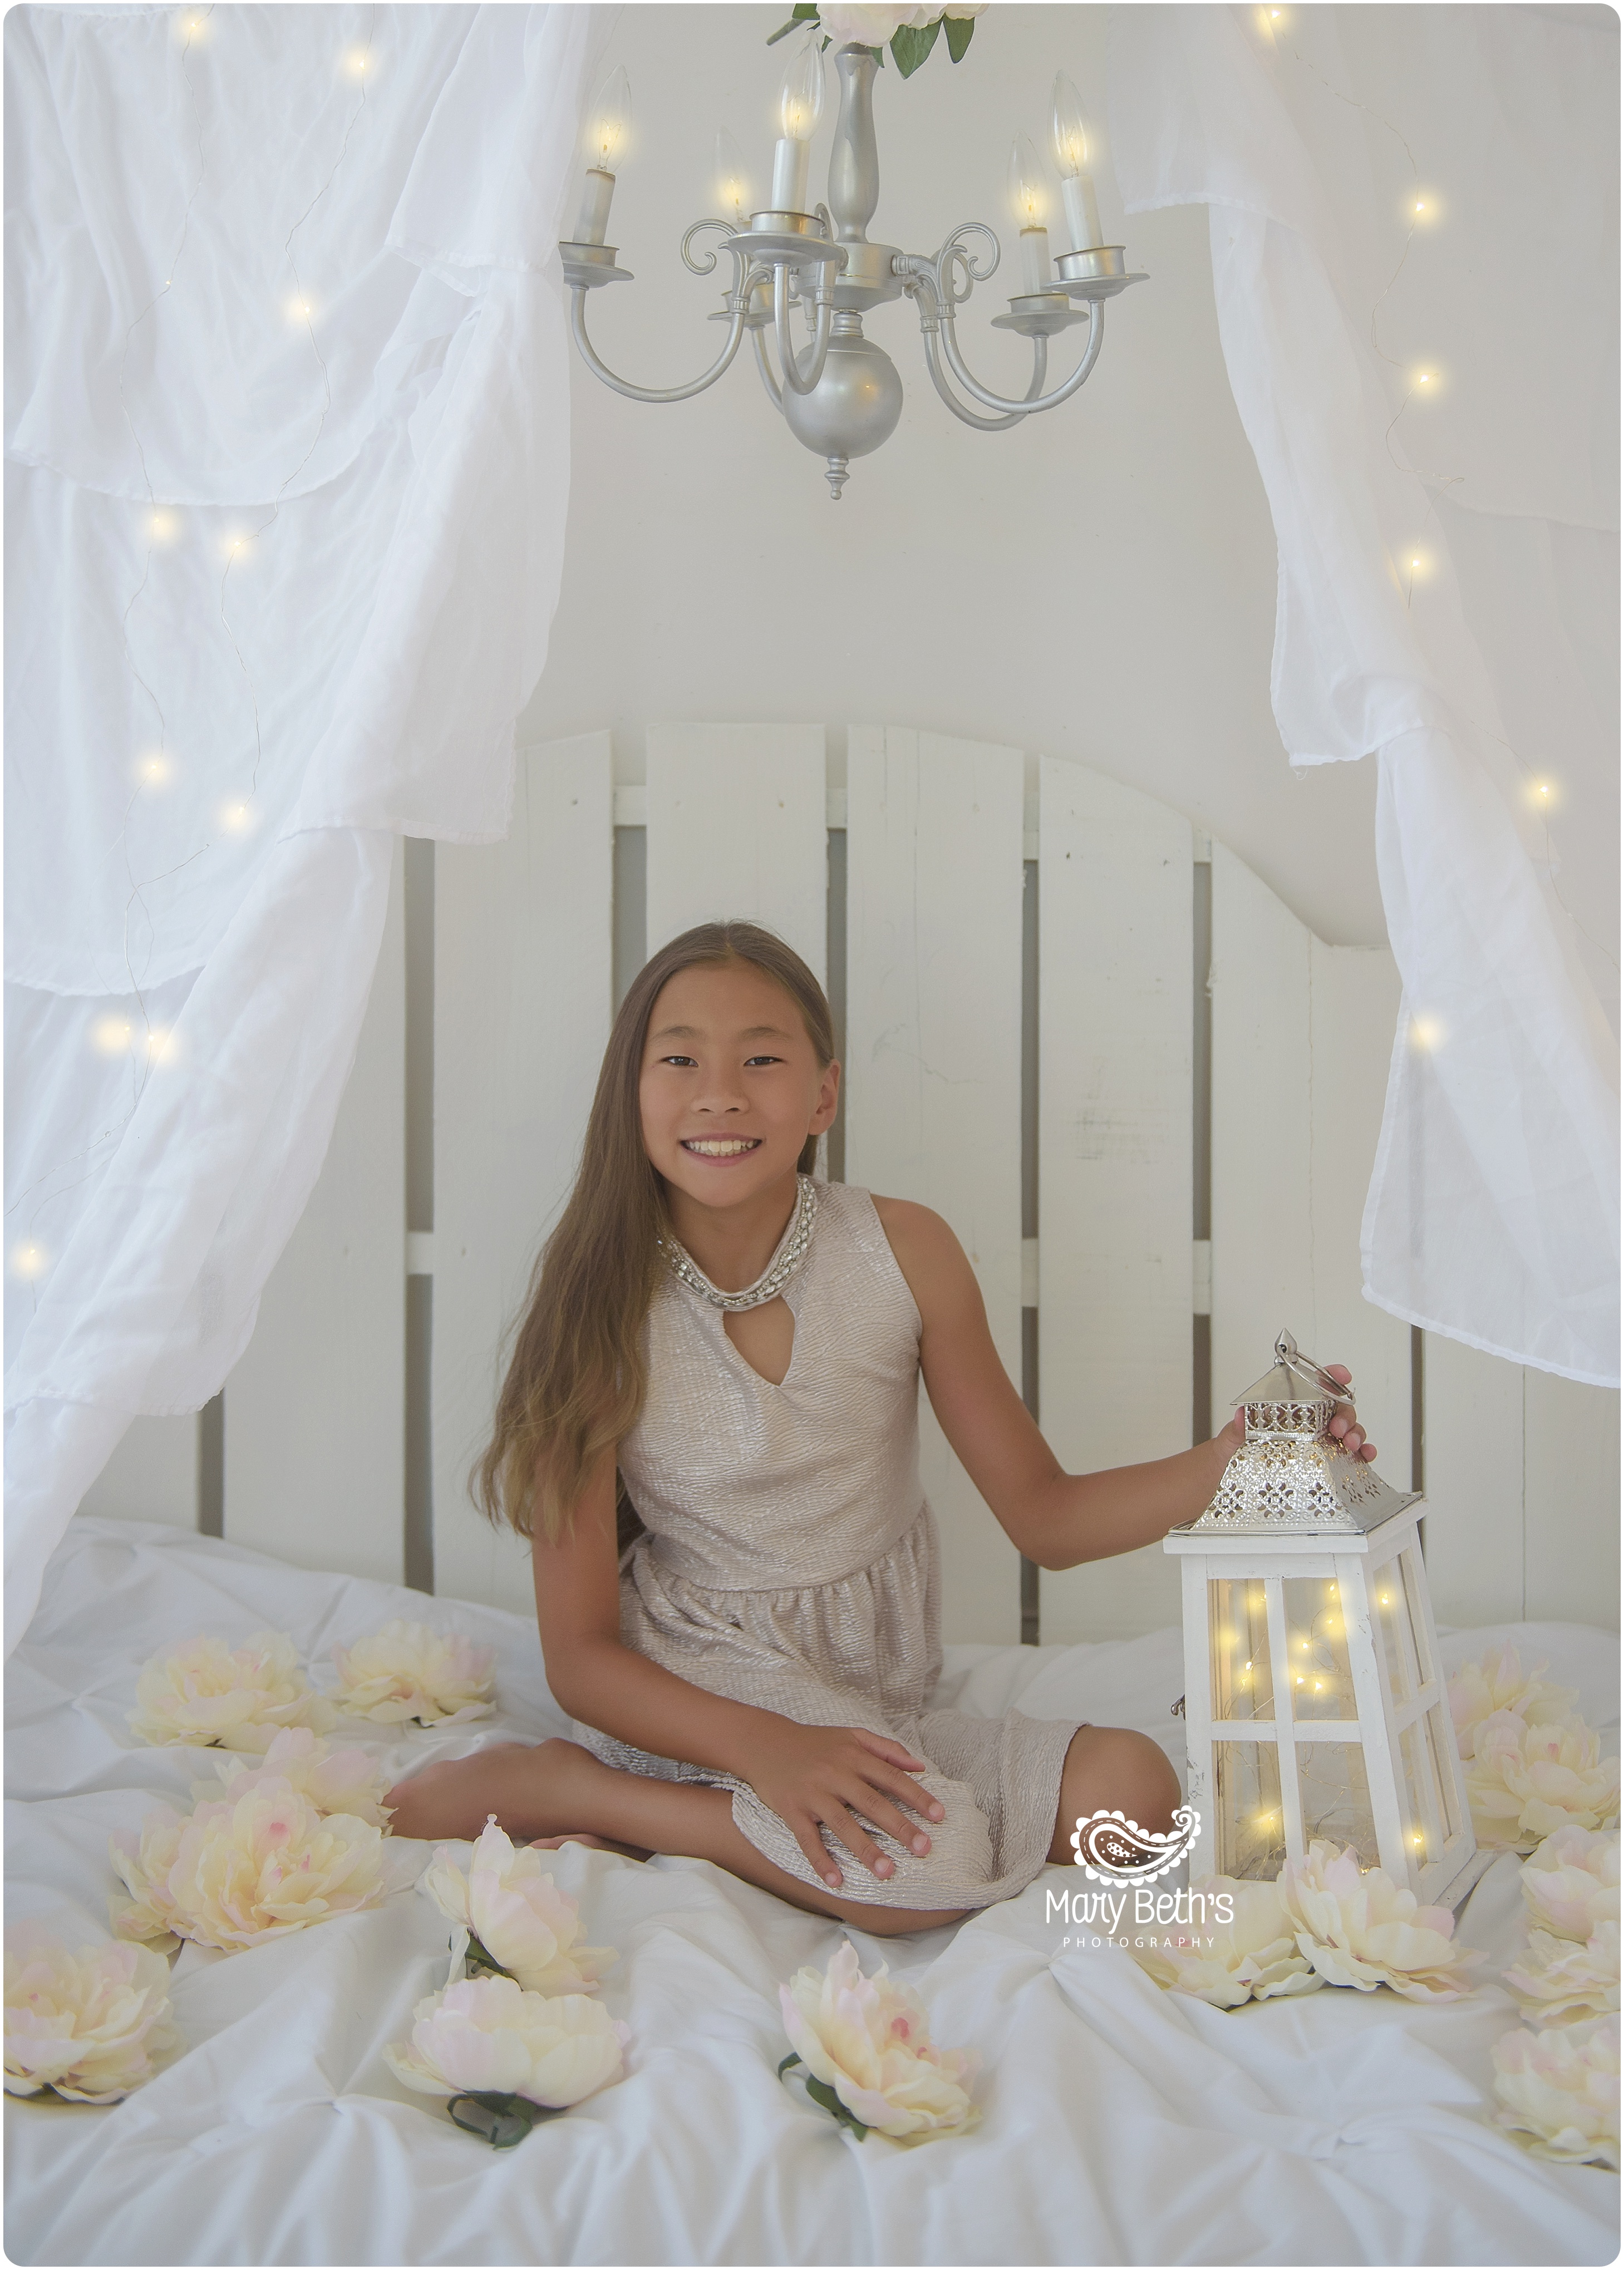 Girl in fairylight tent with lantern and hanging tulips